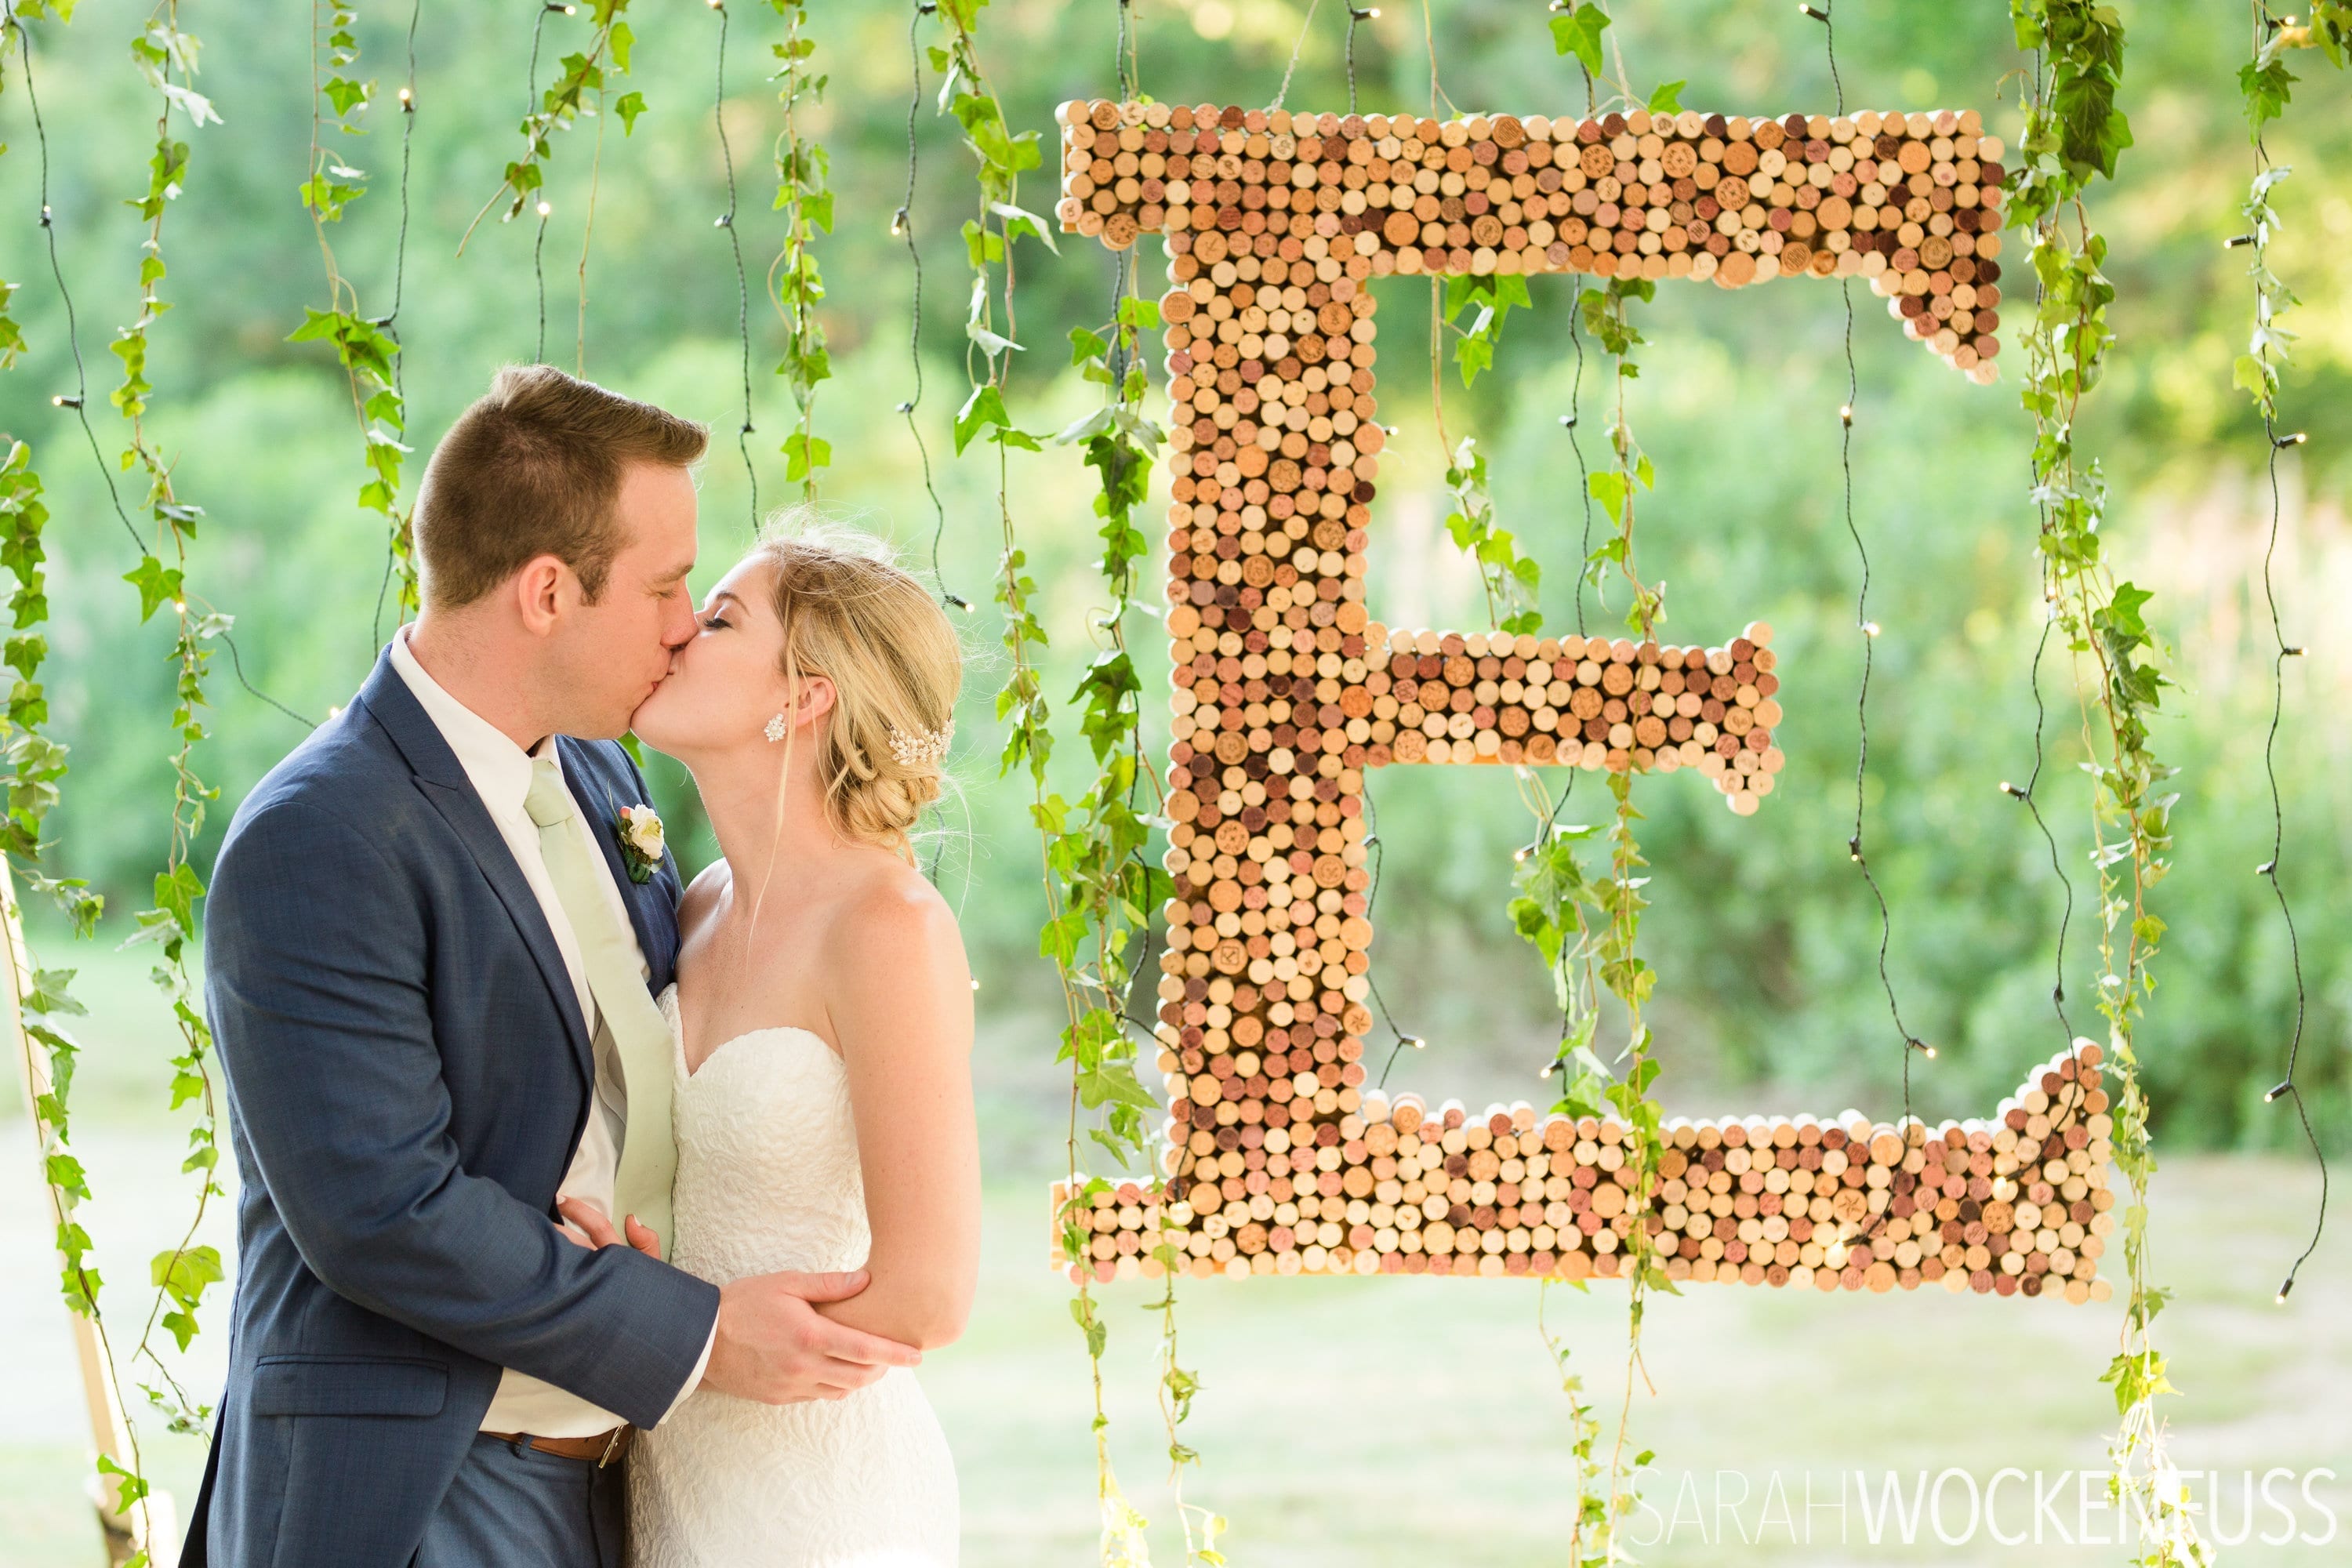 Wedding couple kissing near large letter E made of wine corks.